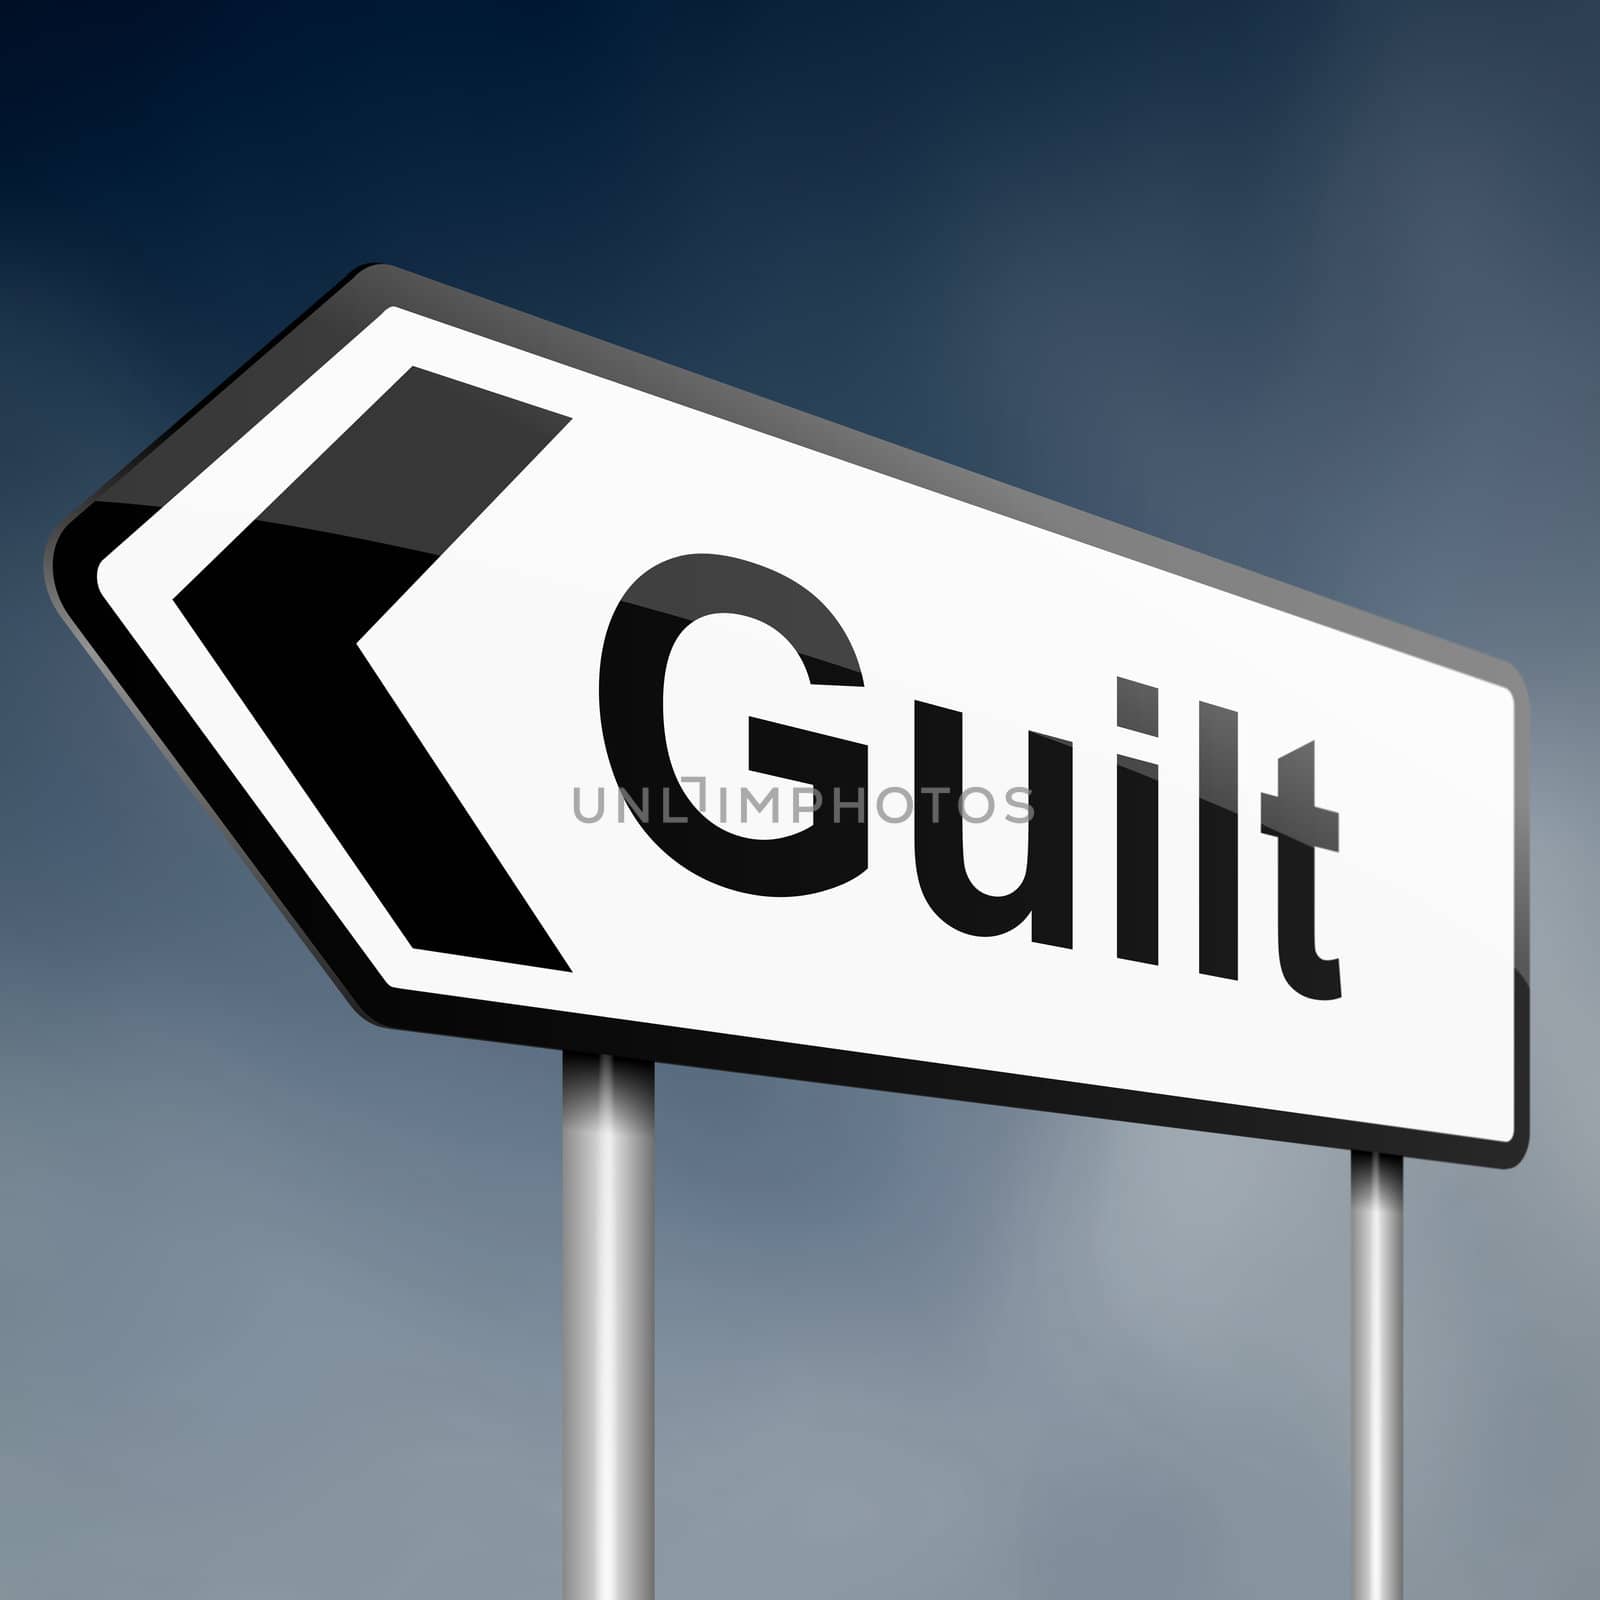 illustration depicting a sign post with directional arrow containing a guilt concept. Blurred background.